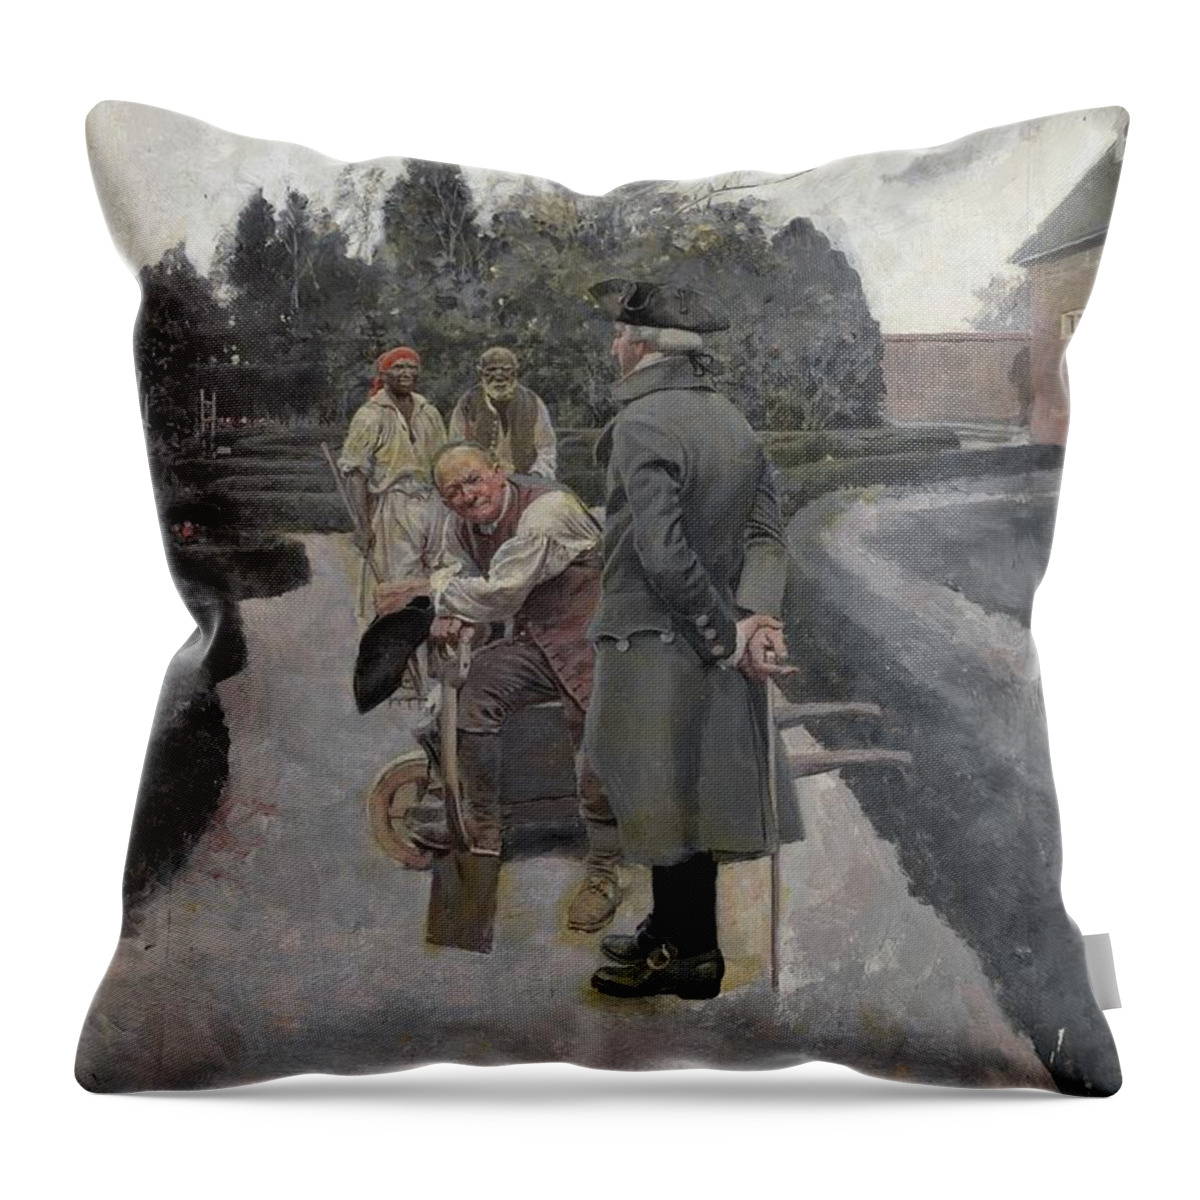 George Washington Throw Pillow featuring the painting Washington In The Garden At Mount Vernon by Howard Pyle